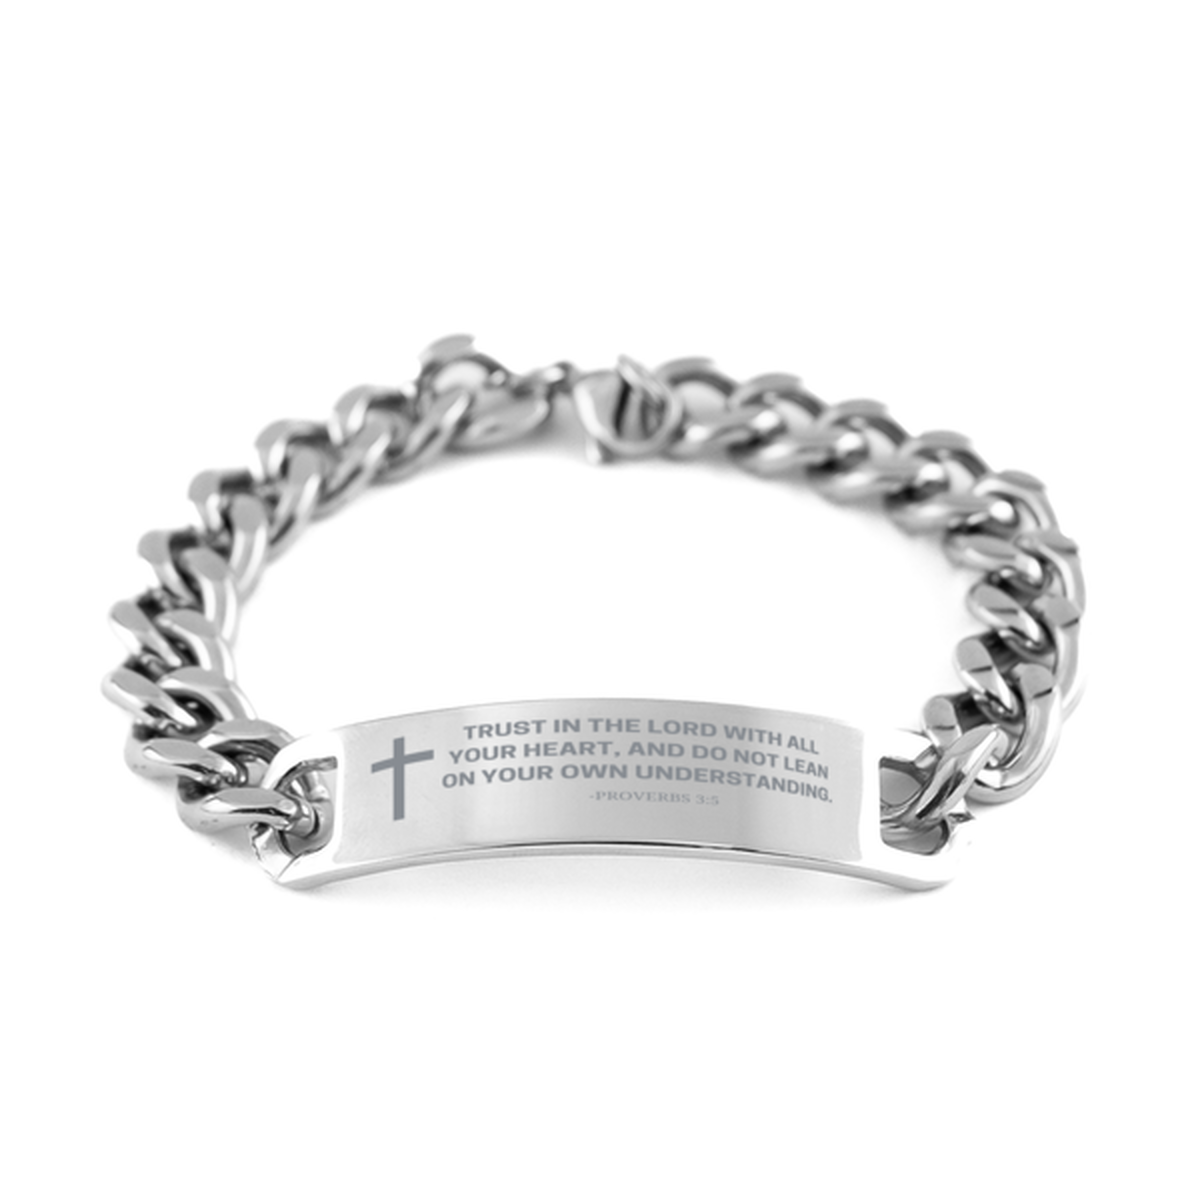 Baptism Gifts For Teenage Boys Girls, Christian Bible Verse Cuban Chain Bracelet, Trust in the Lord with all your heart, Catholic Confirmation Gifts for Son, Godson, Grandson, Nephew